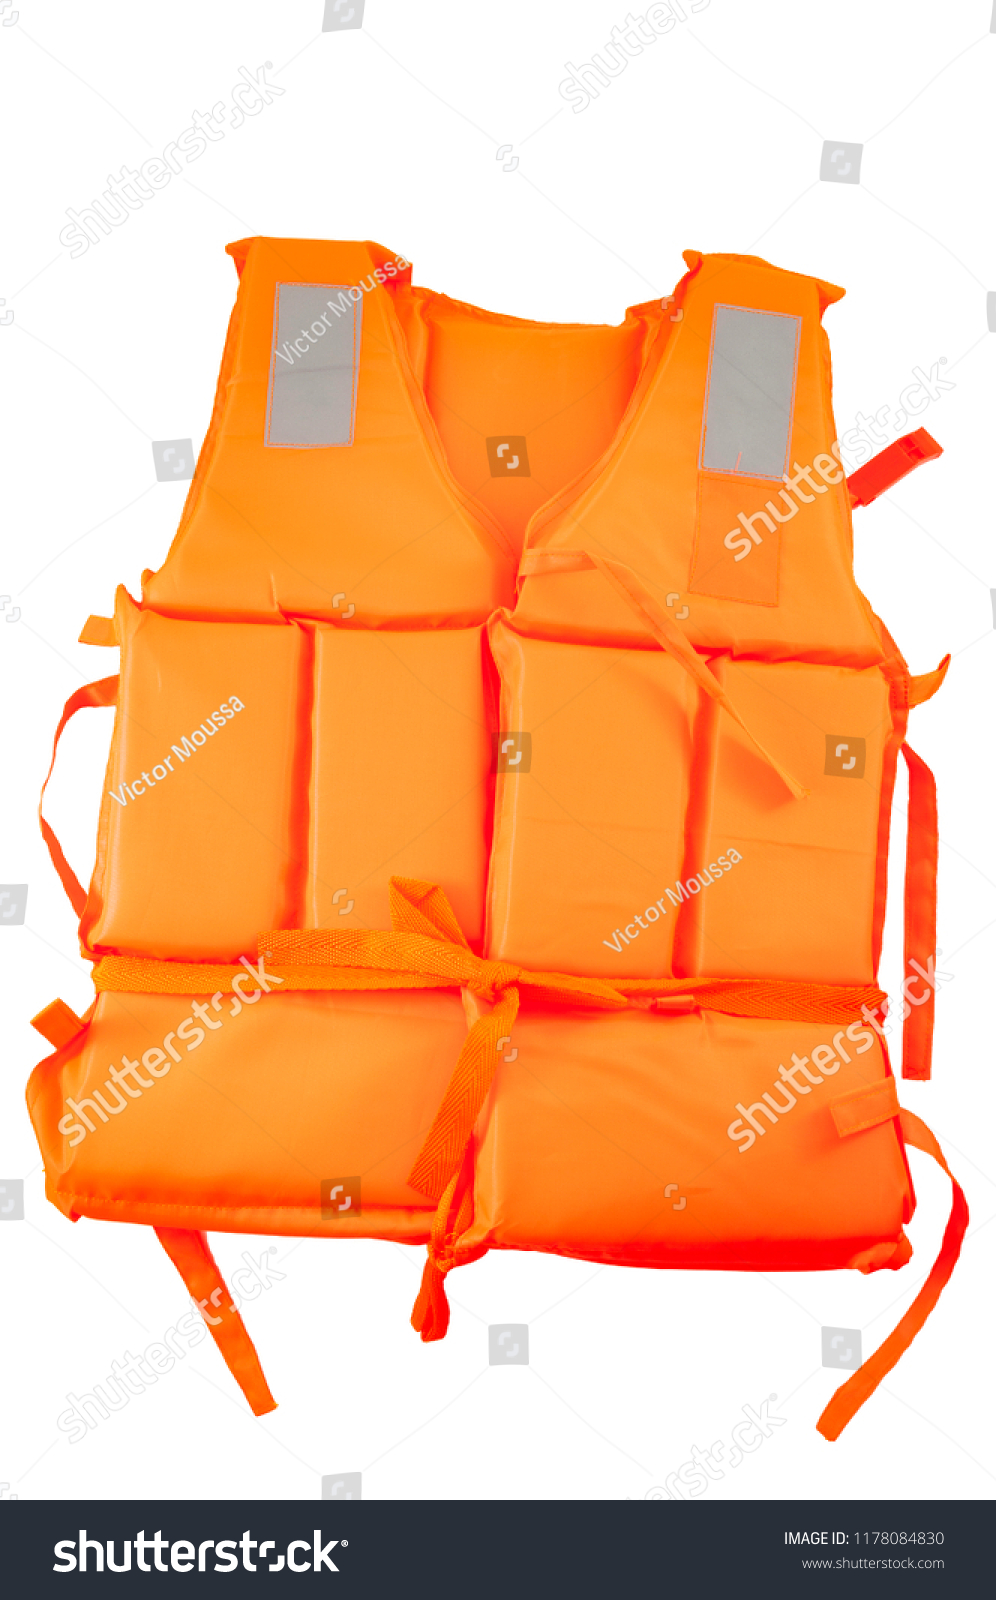 1,327 Floatation device Images, Stock Photos & Vectors | Shutterstock